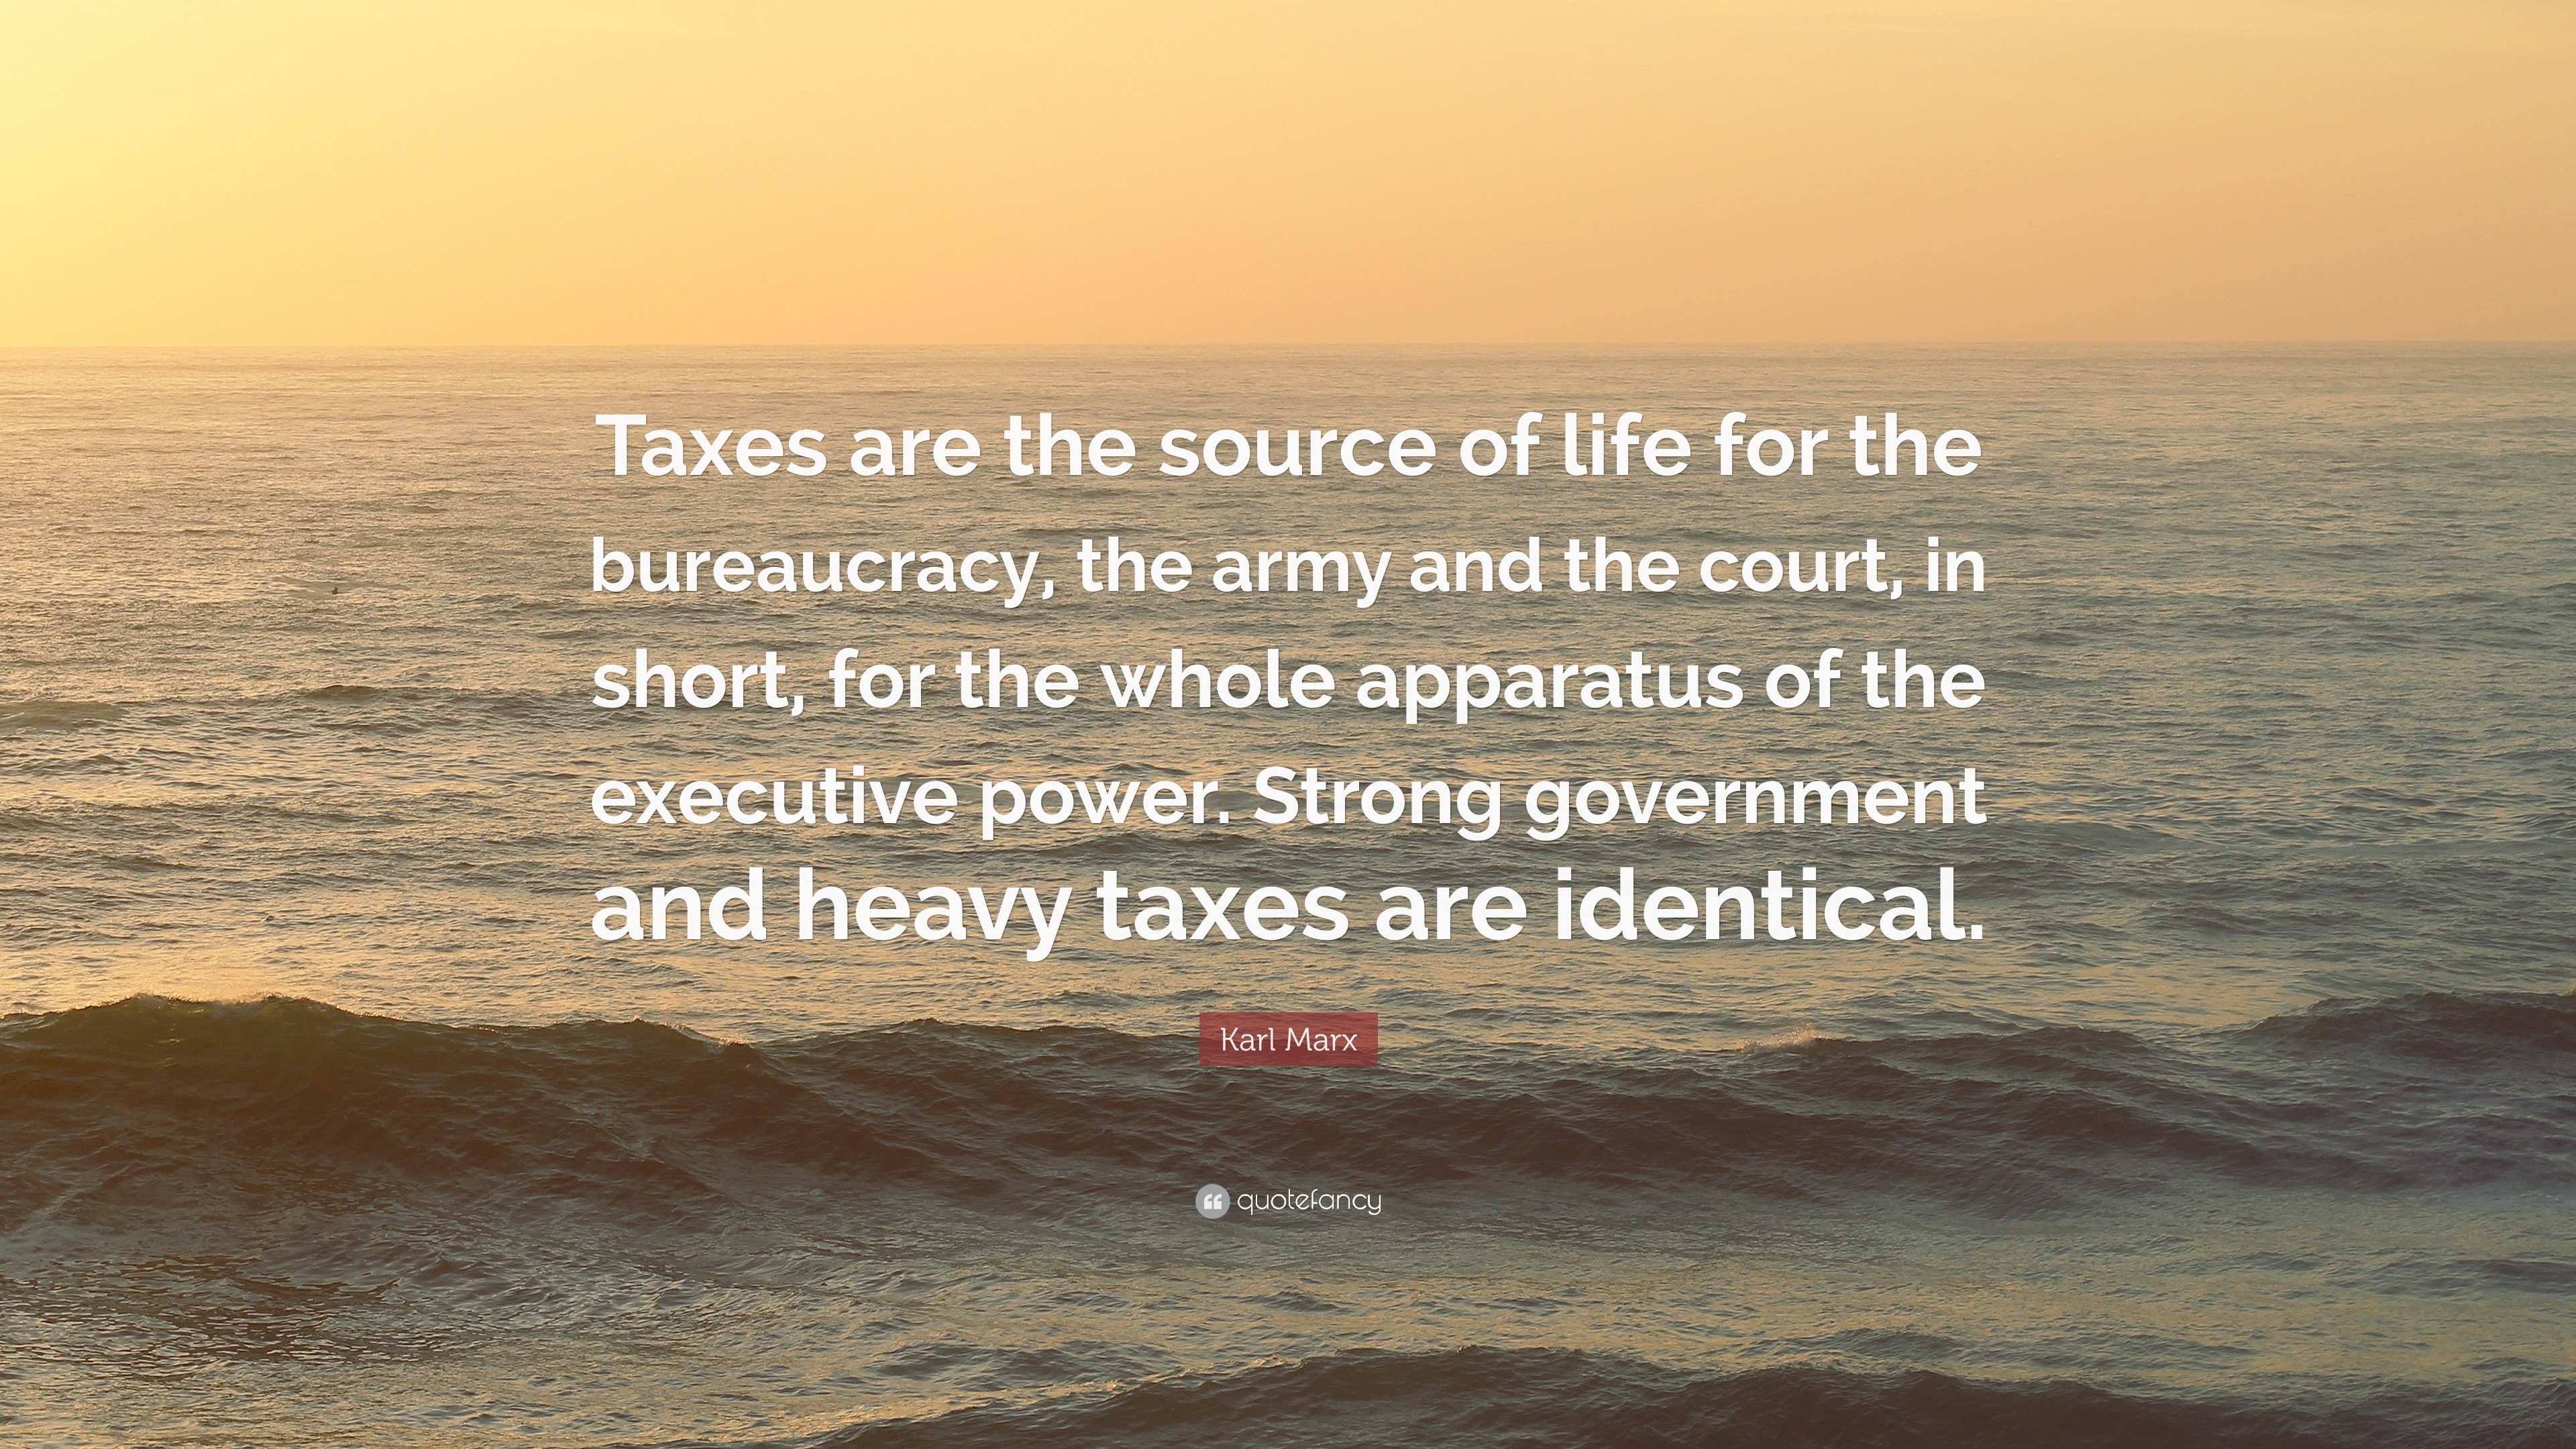 3840x2160 Karl Marx Quote: “Taxes are the source of life for the bureaucracy, the